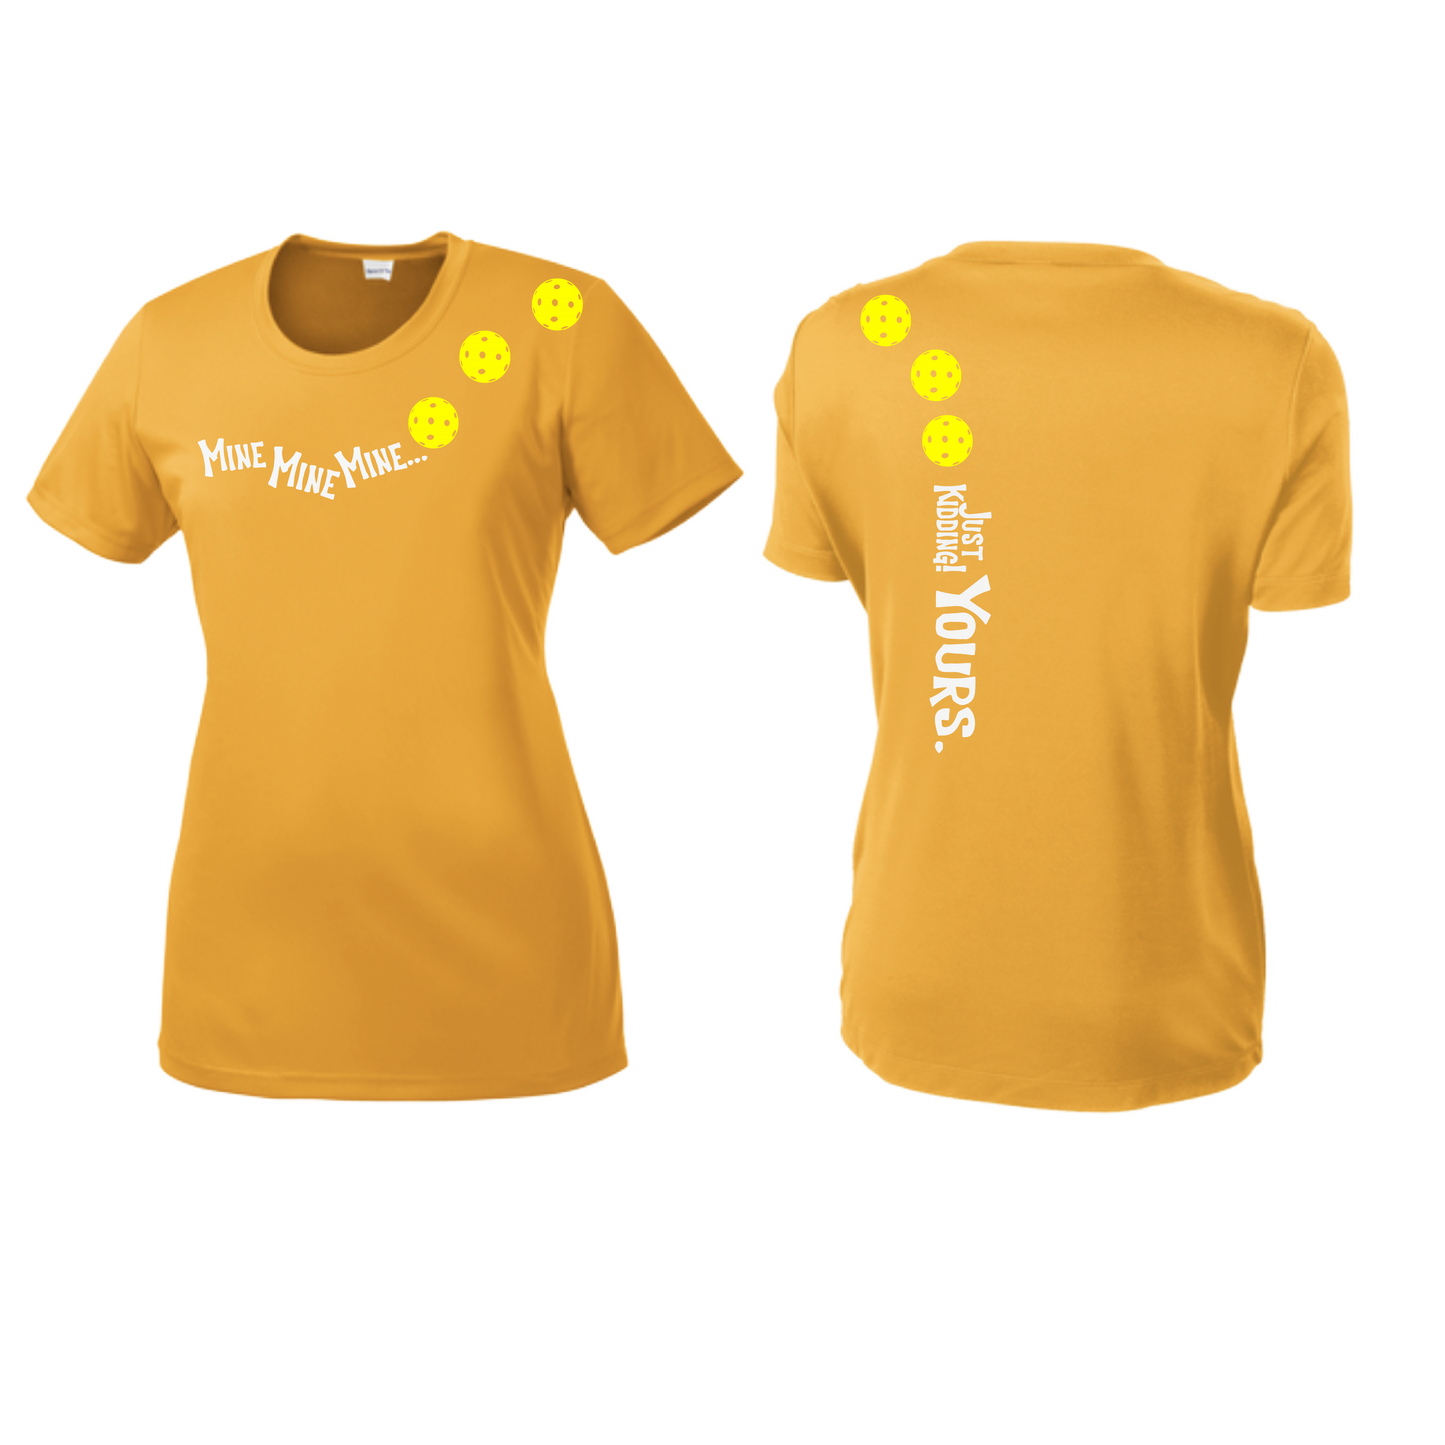 Mine JK Yours (Pickleball Colors Orange Yellow or Red) | Women’s Short Sleeve Crewneck Pickleball Shirts | 100% Polyester (Copy)